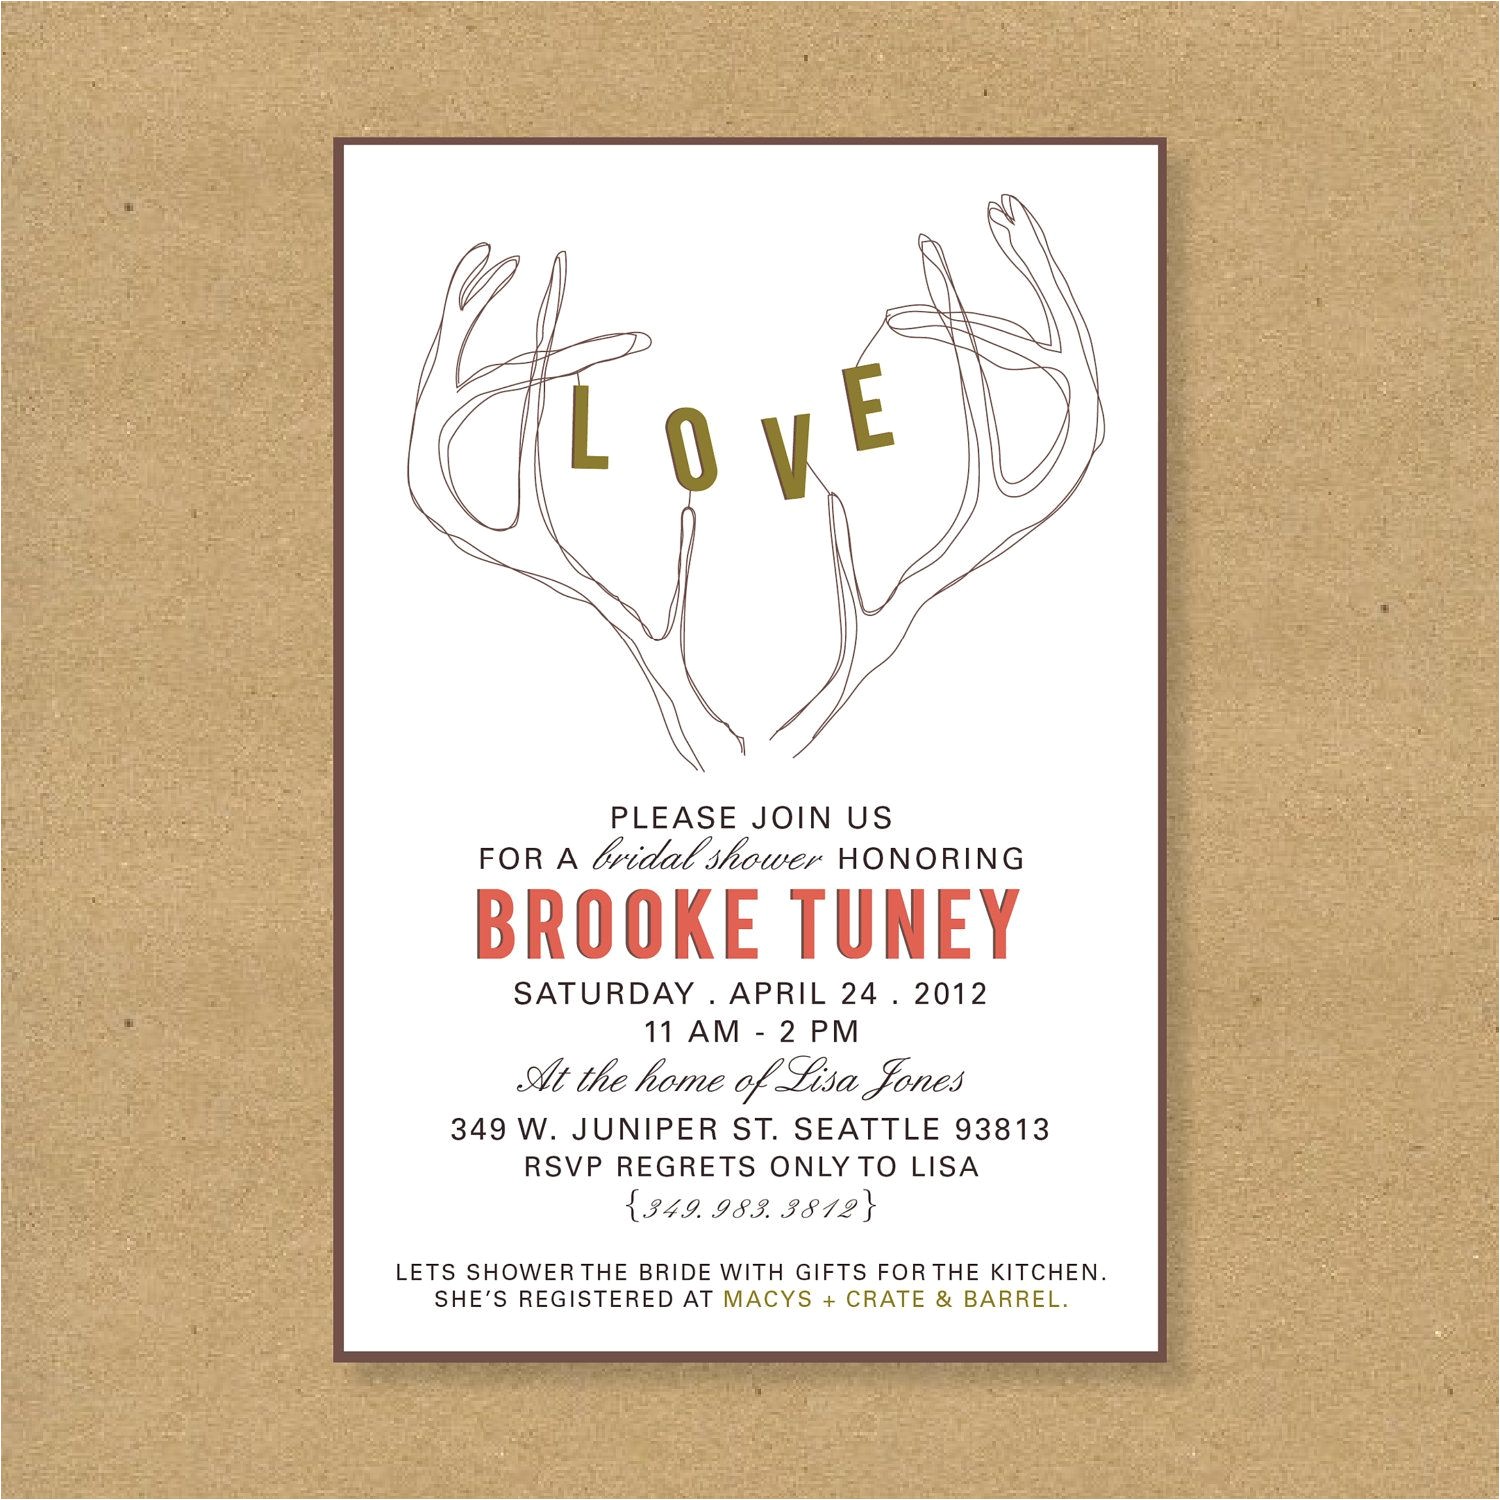 How to Word Bridal Shower Invitations Gift Card Bridal Shower Invitation Wording Gift Card